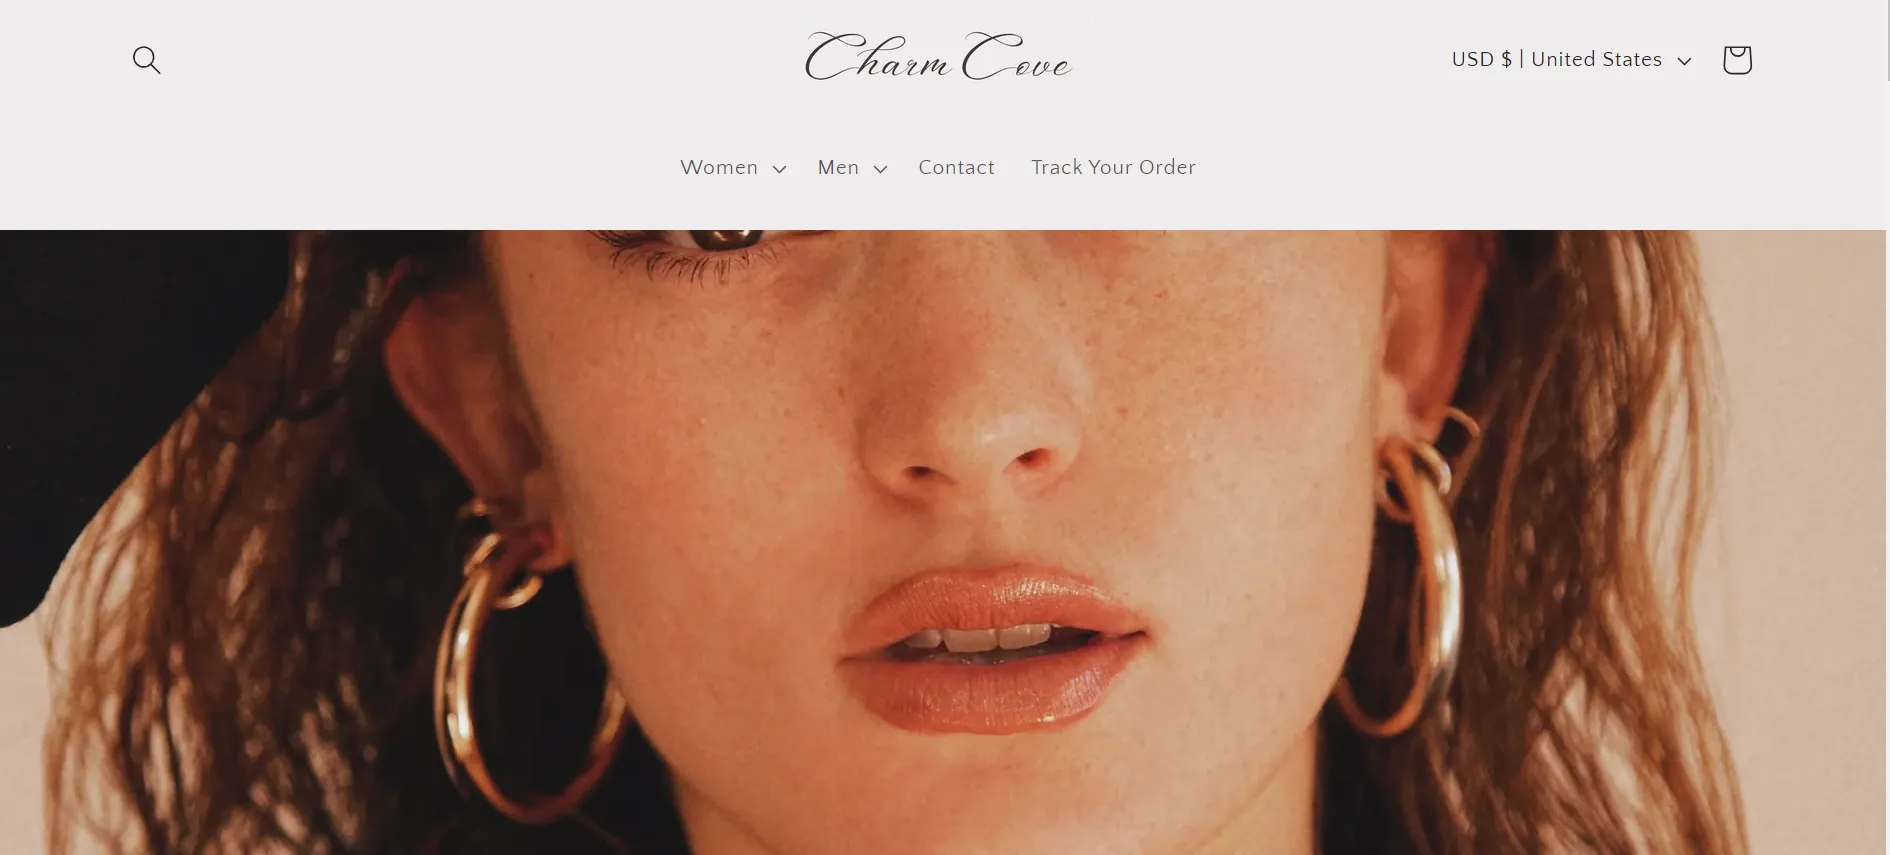 You are currently viewing Charm Cove Scam – Fake Charmcove.Com Store